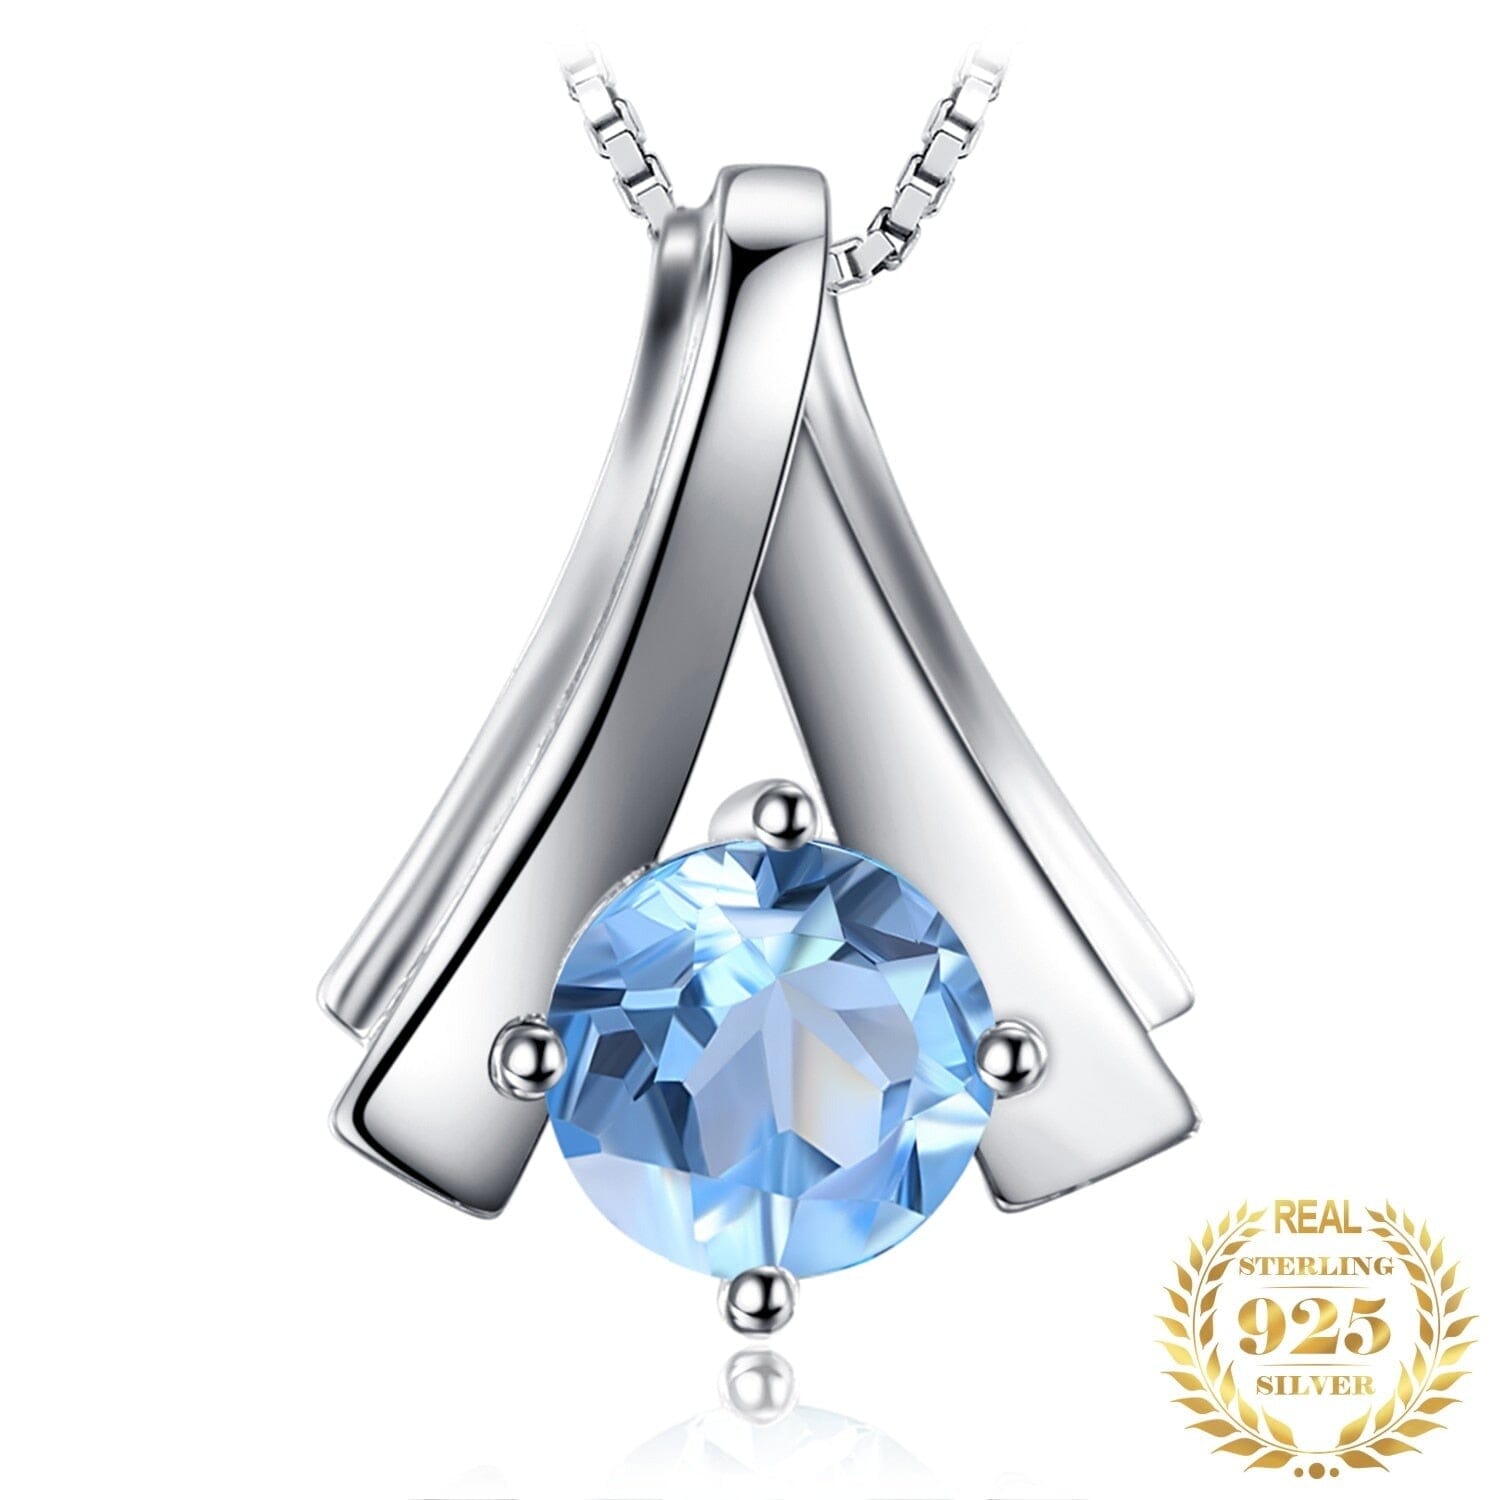 Stylish Natural Sky Blue Topaz Pendant - 925 Sterling Silver ( no Chain included )Pendant